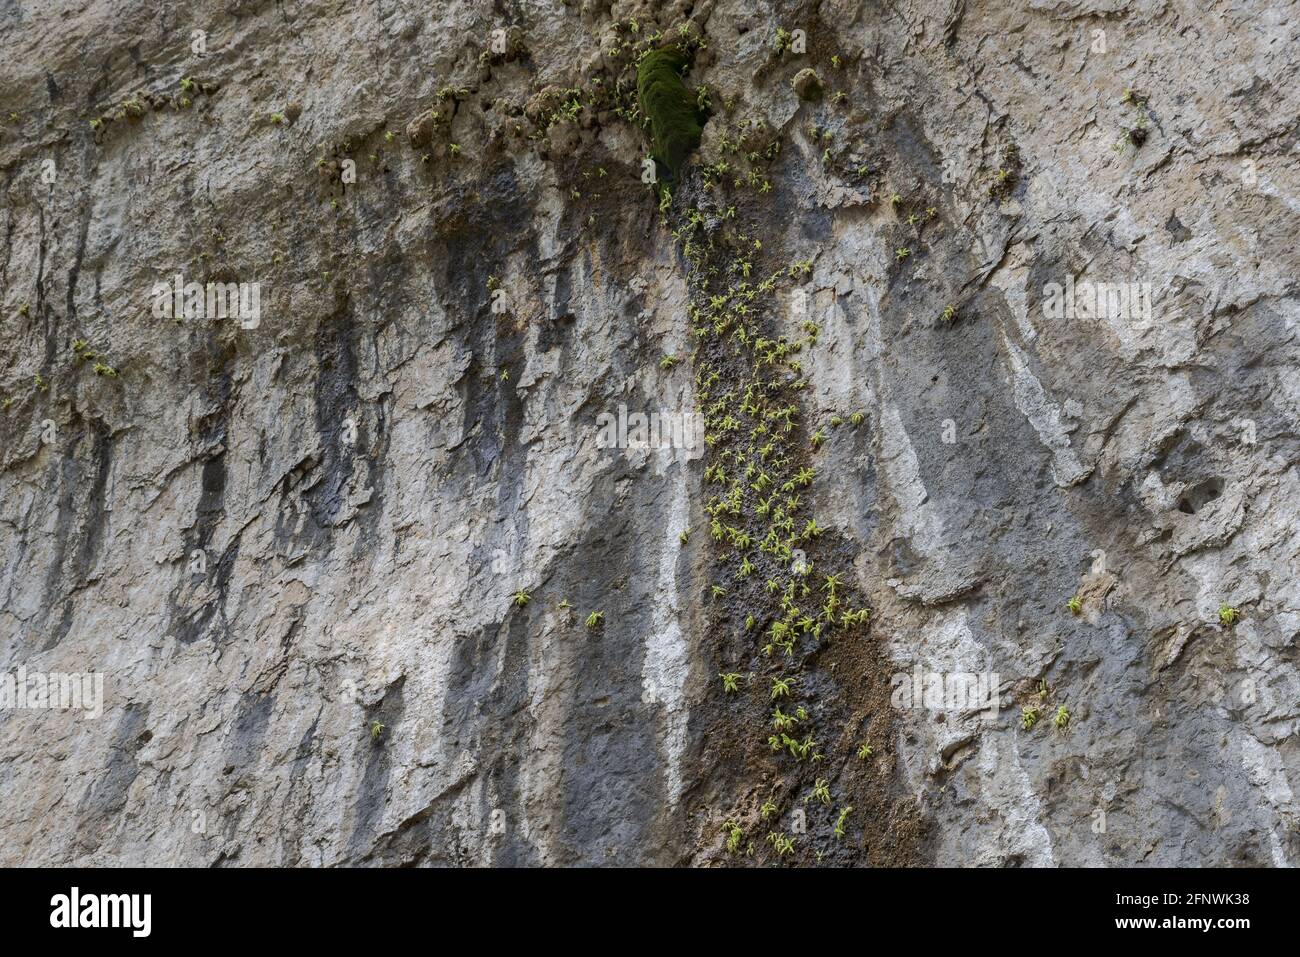 Butterworts, Pinguicula mundi, growing on a wet rock wall in Beteta Gorge, province of Cuenca, Spain Stock Photo